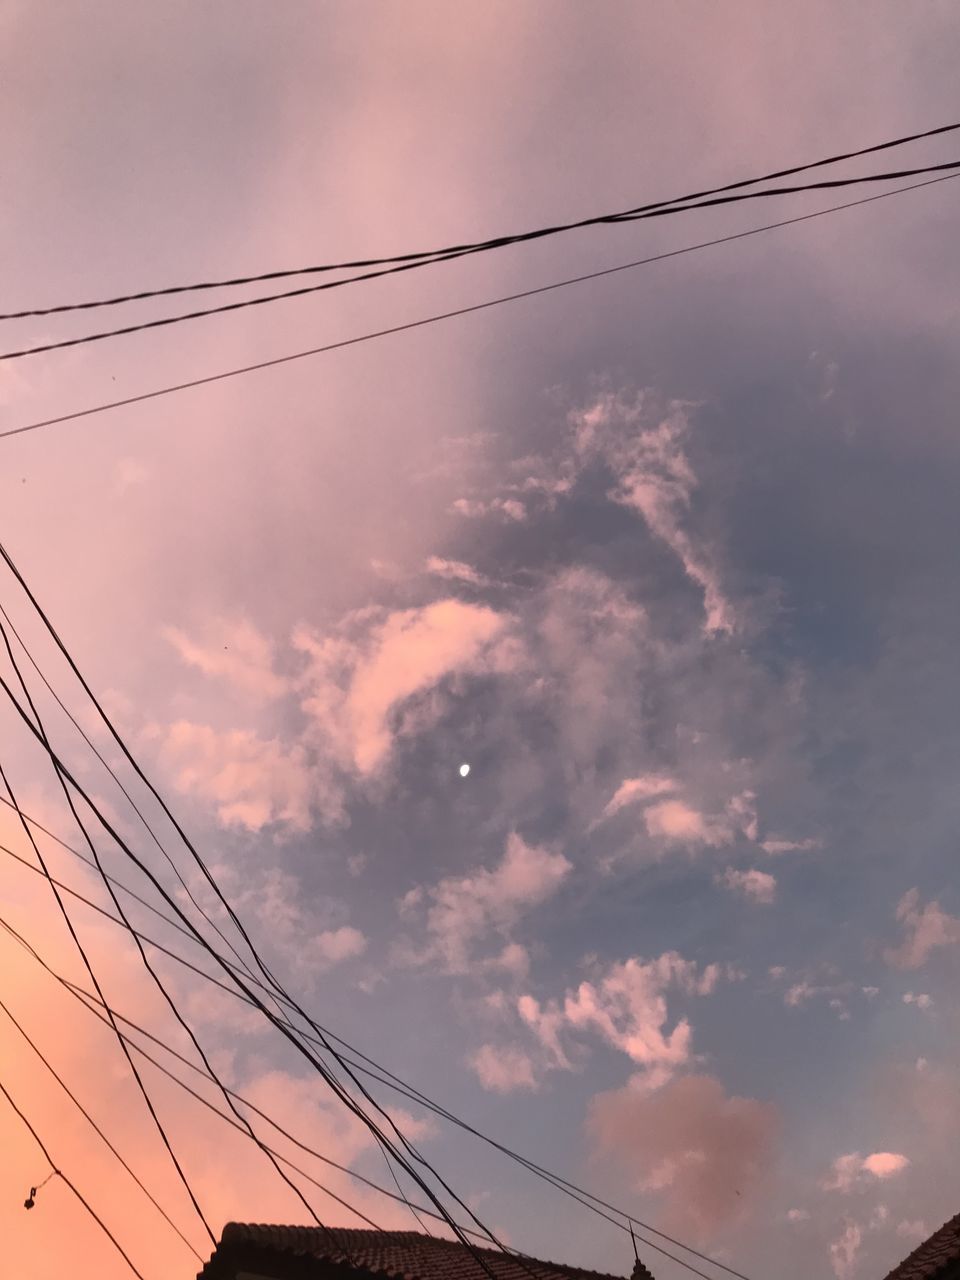 LOW ANGLE VIEW OF POWER CABLES AGAINST SKY DURING SUNSET